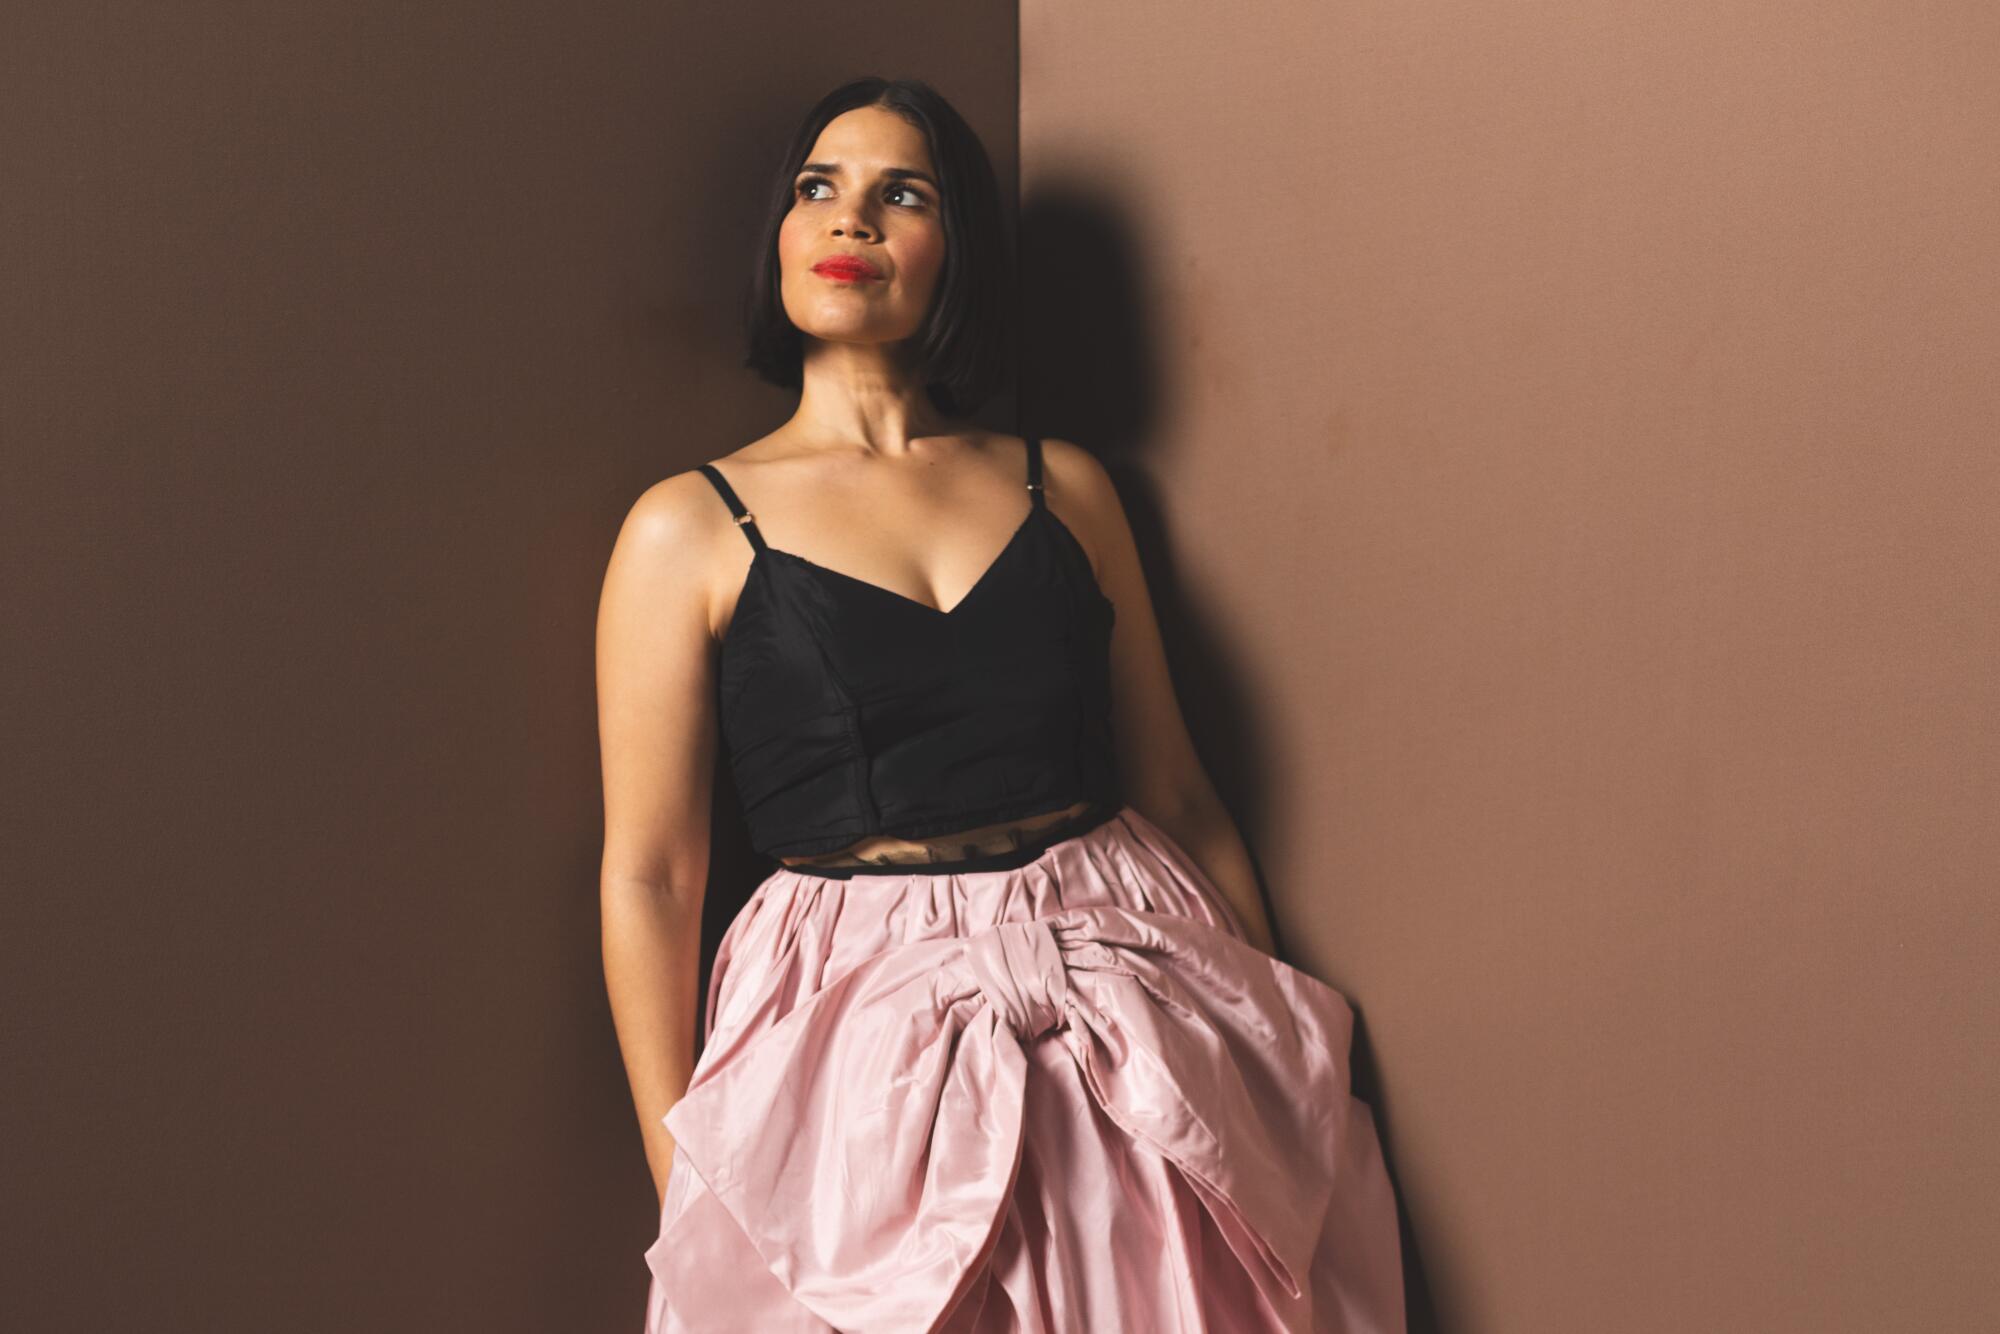 America Ferrera wears a black camisole top and pink skirt with a big bow, leaning against a wall and looking up.